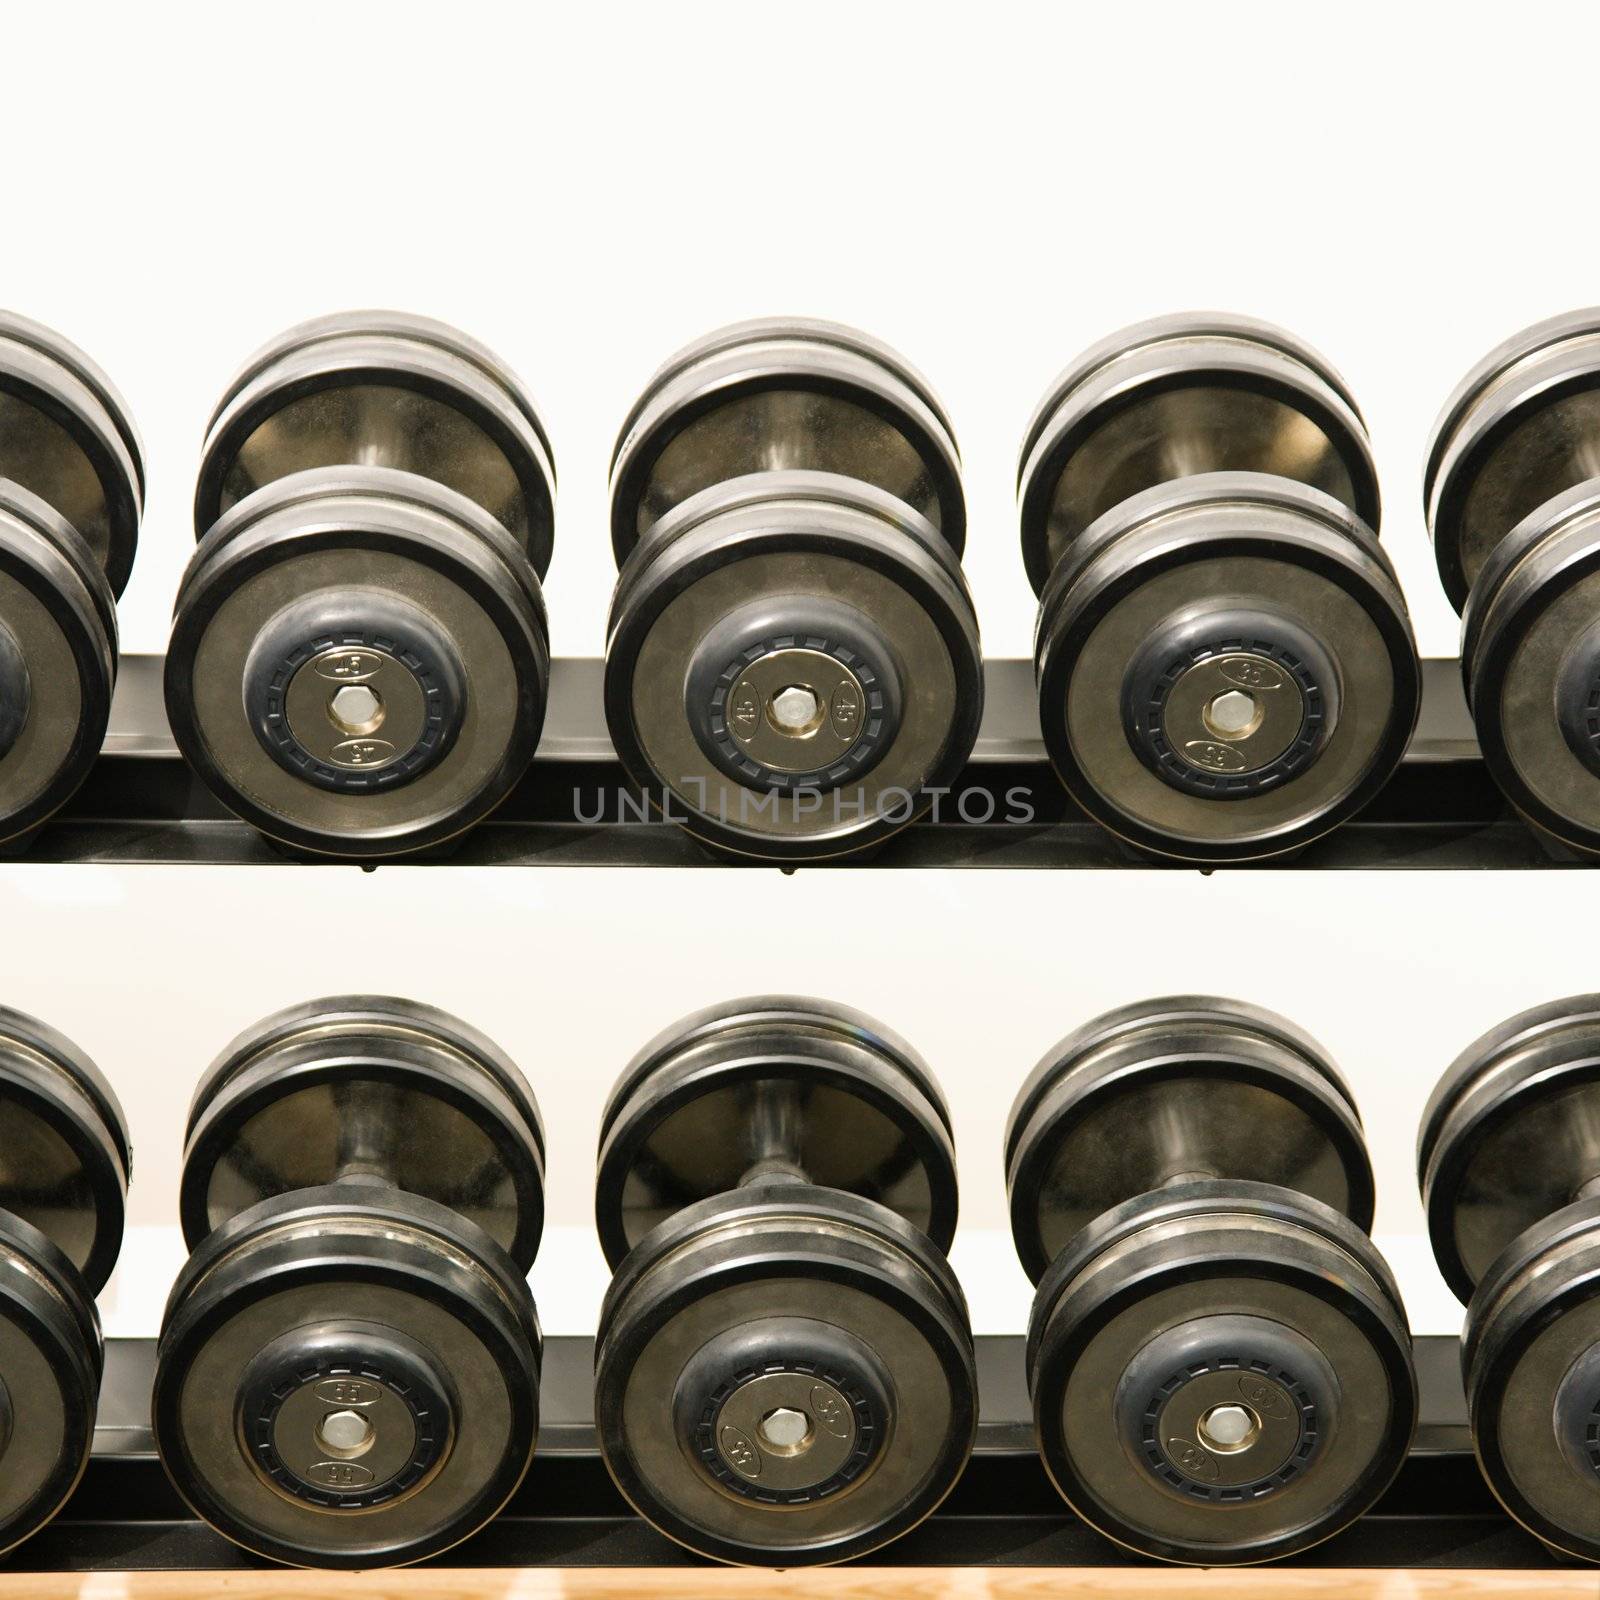 Hand weights on rack at health club.